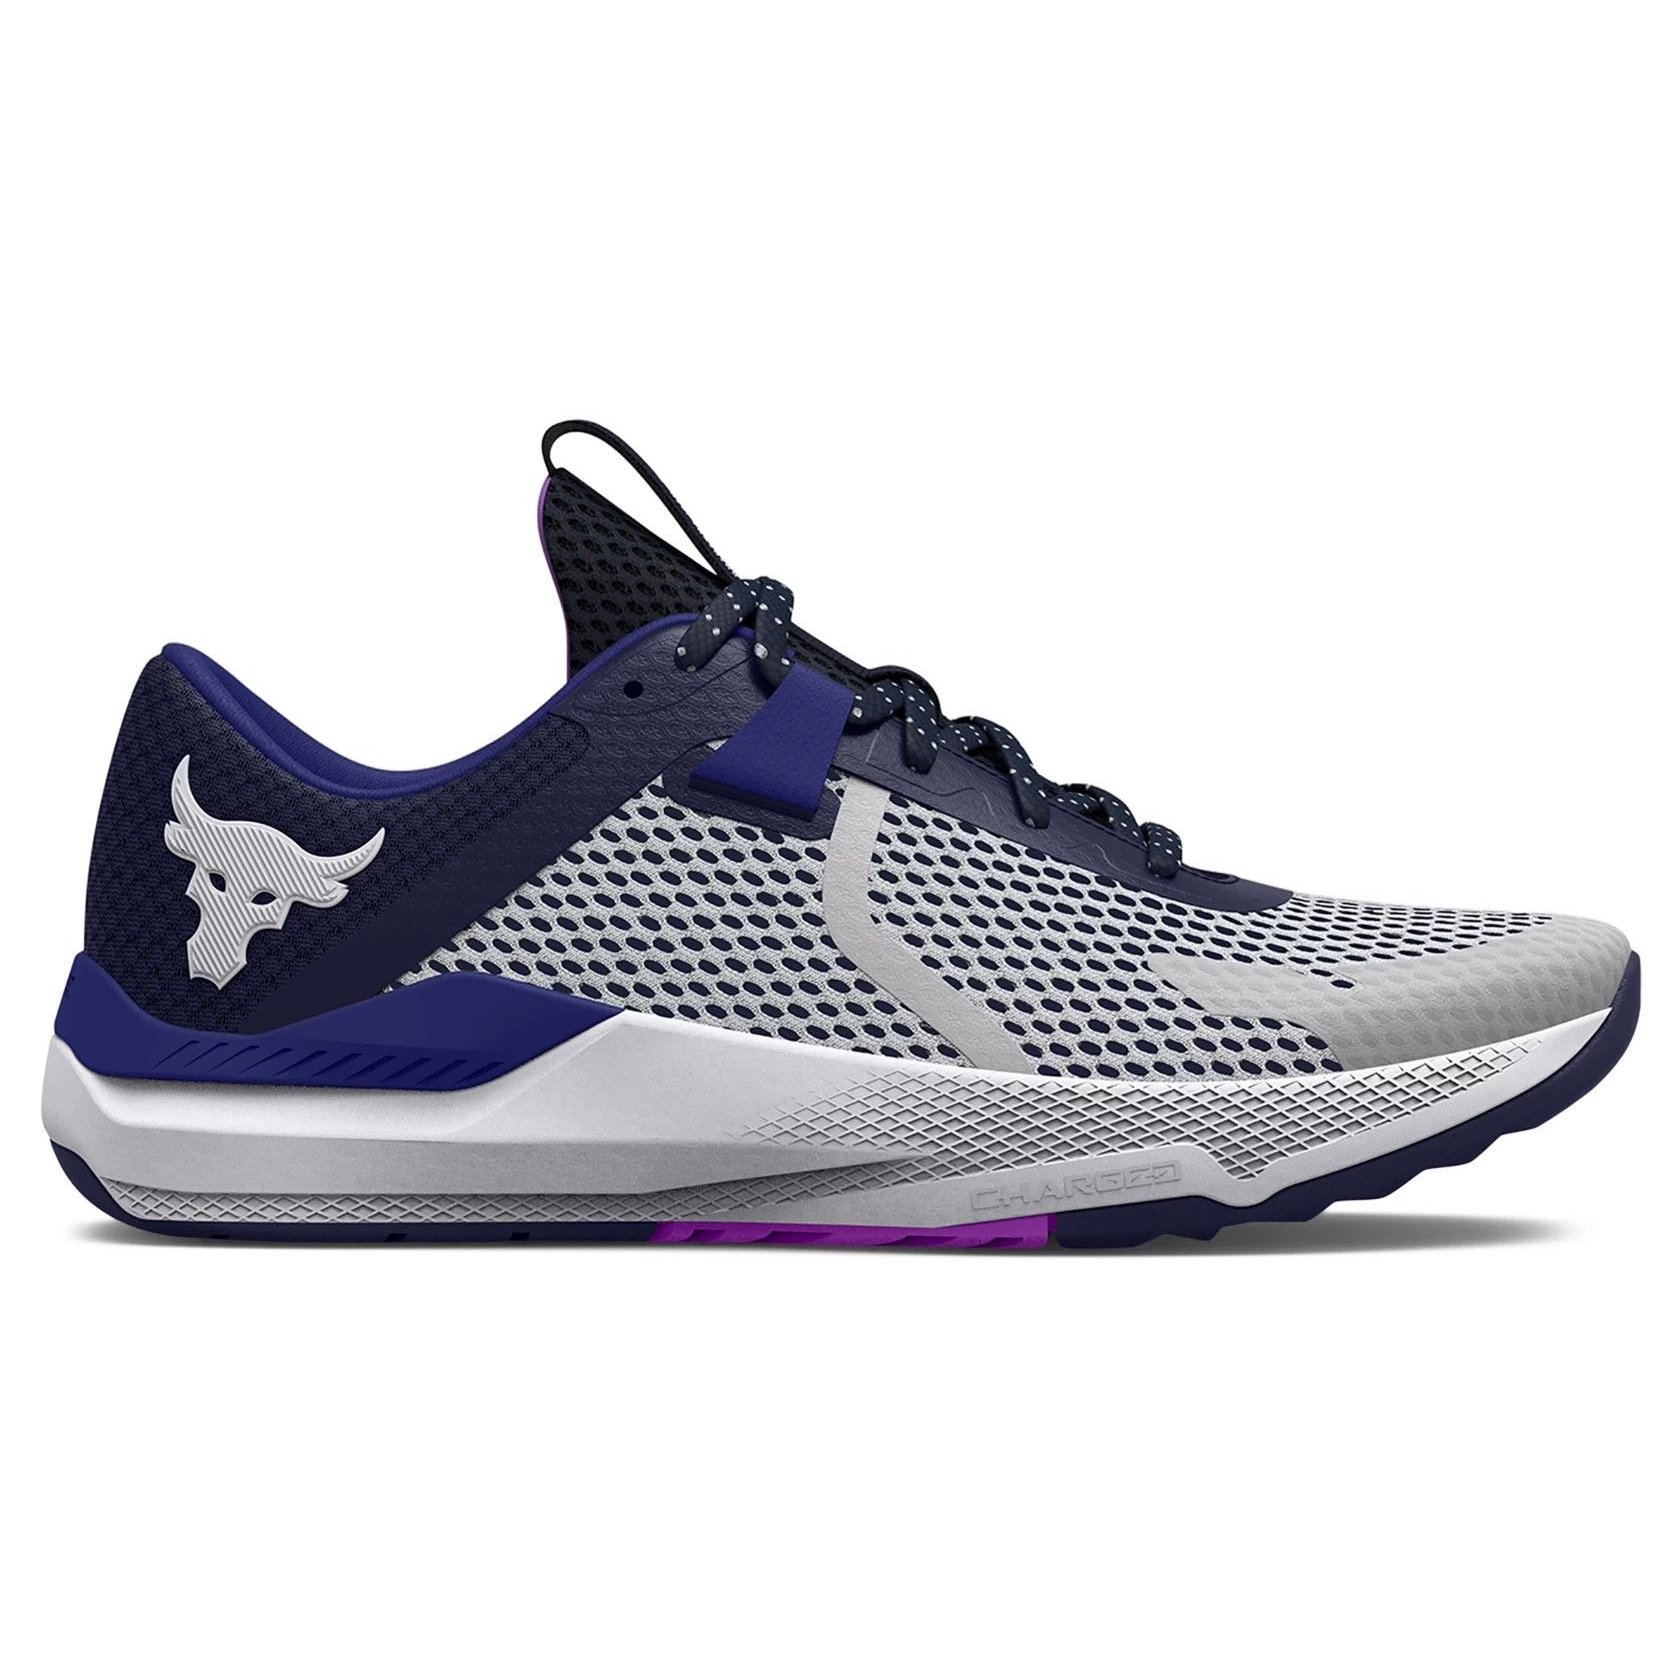 Under Armour Project Rock BSR  2 shoes for crossfit